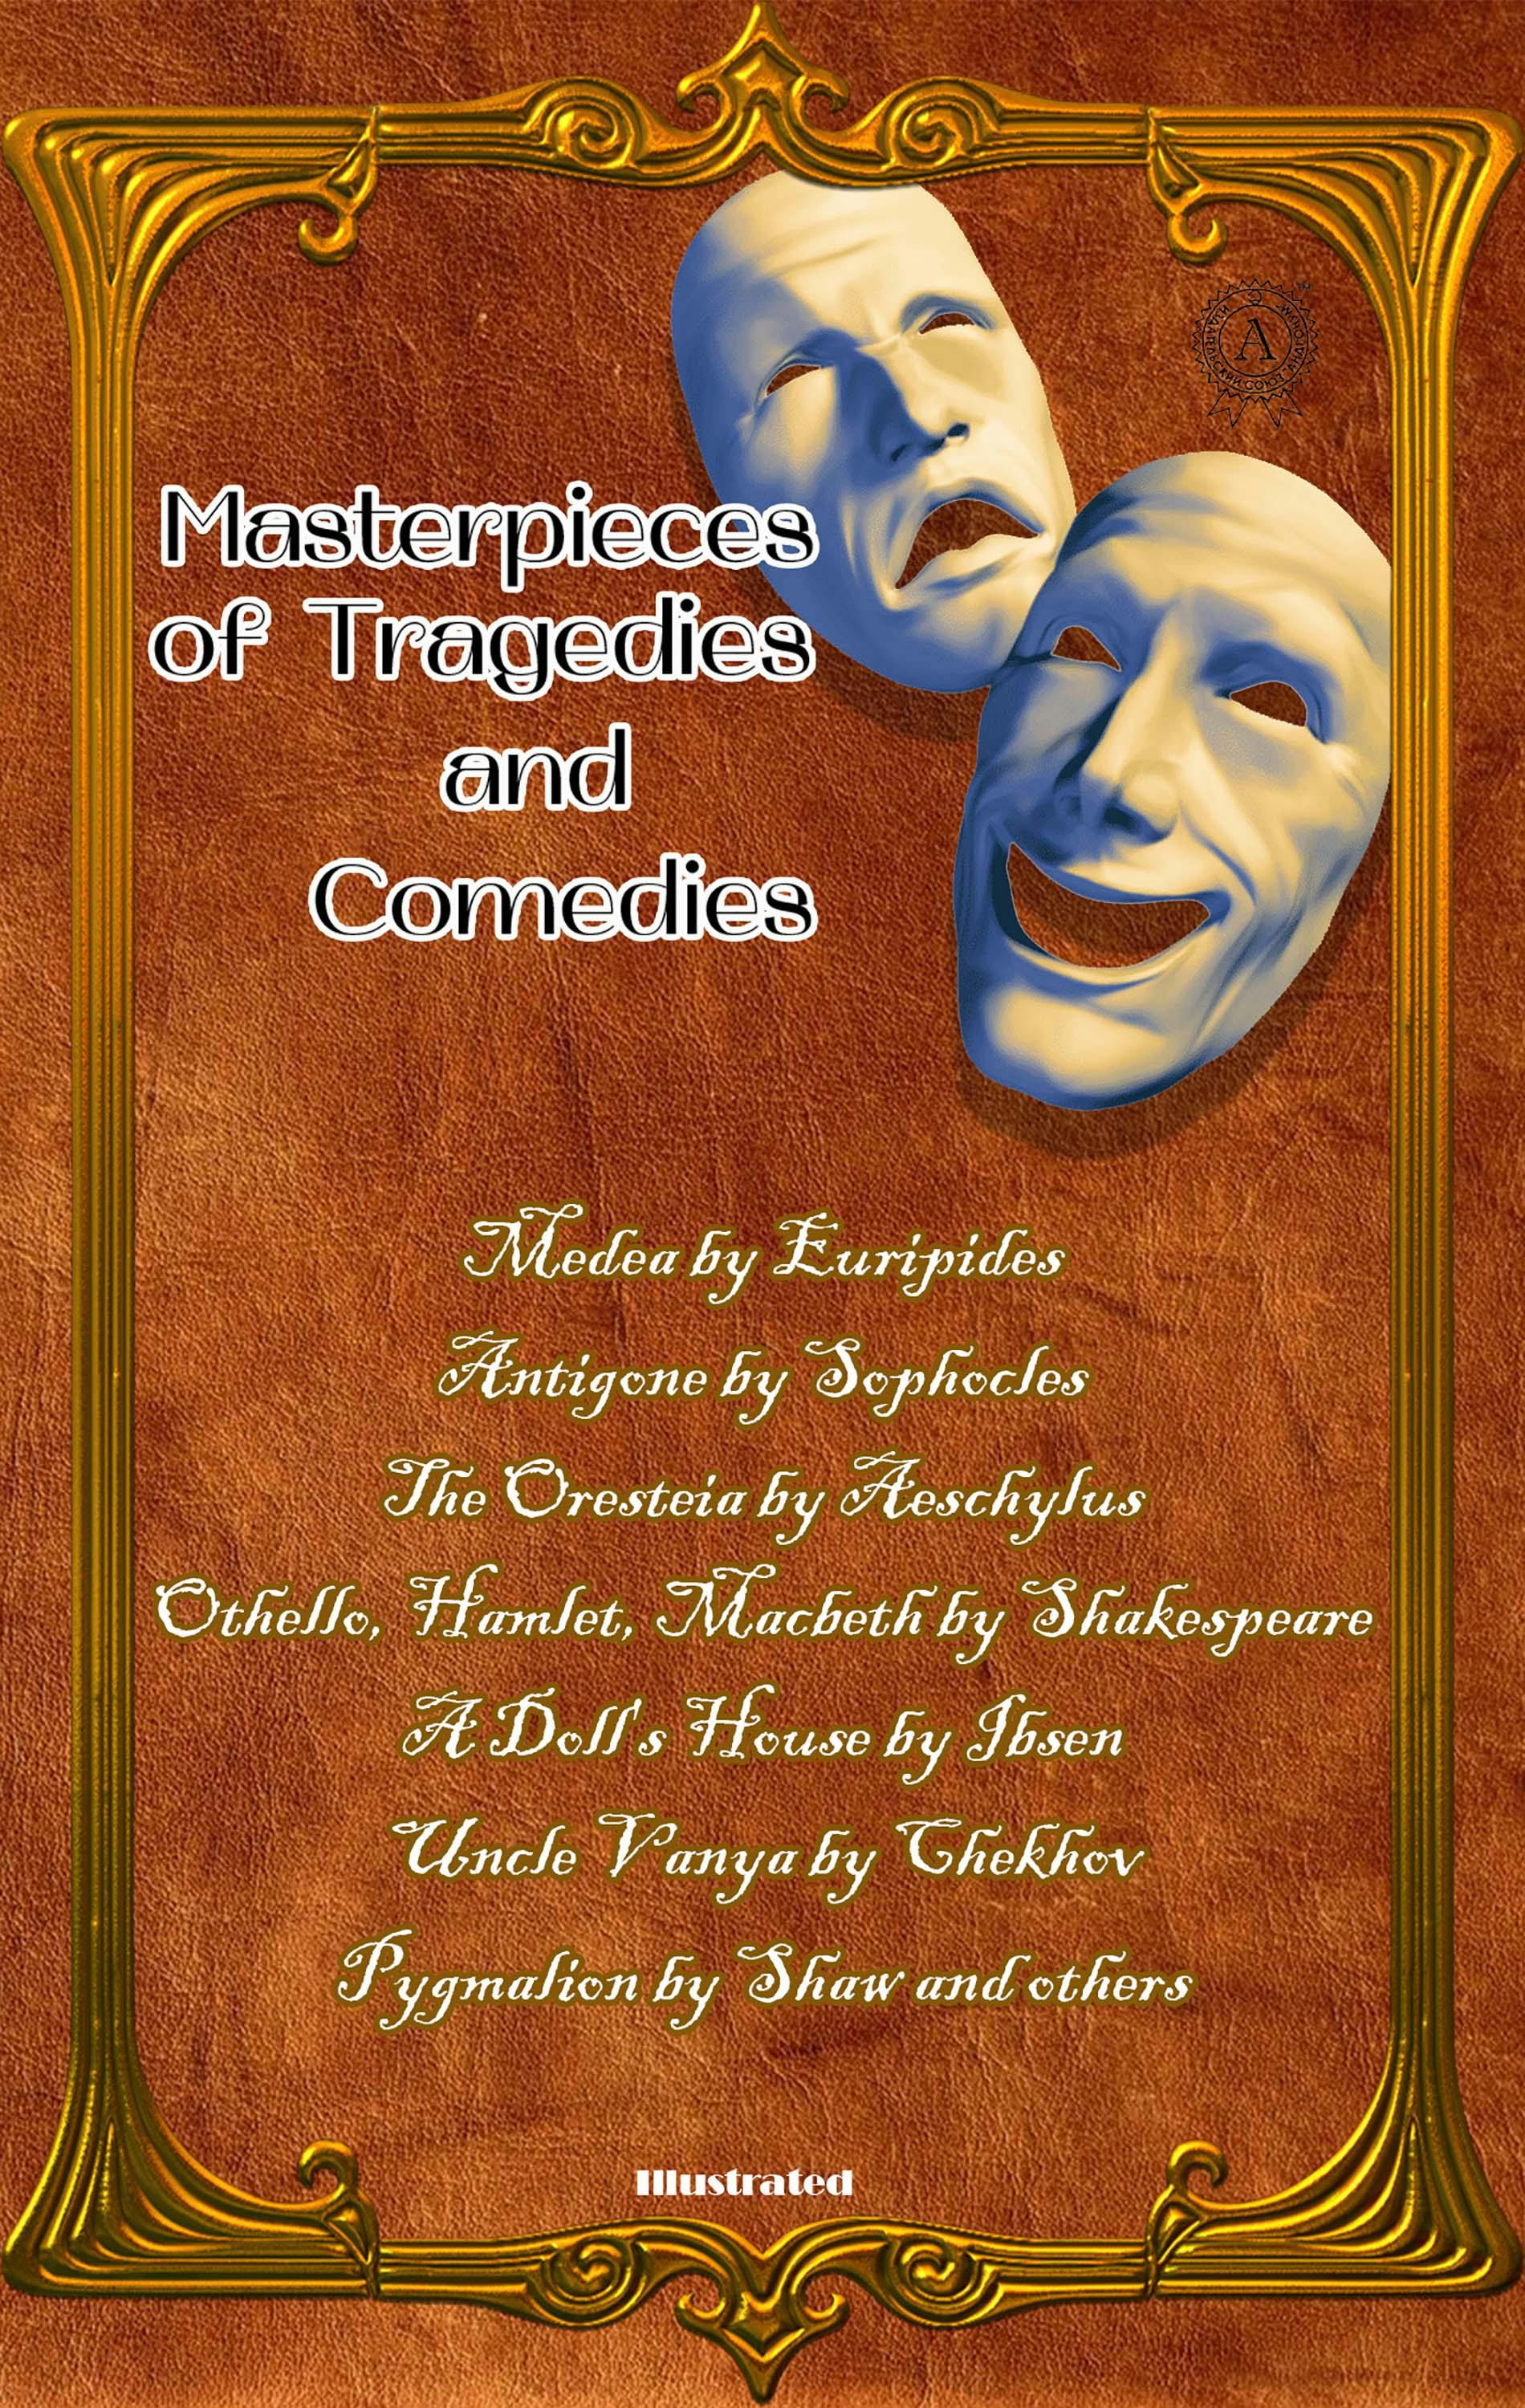 Masterpieces of Tragedies and Comedies: Medea by Euripides; Antigone by Sophocles; The Oresteia by Aeschylus; Othello, Hamlet, Macbeth by Shakespeare; A Doll's House by Ibsen; Uncle Vanya by Chekhov; Pygmalion by Shaw and others - undefined